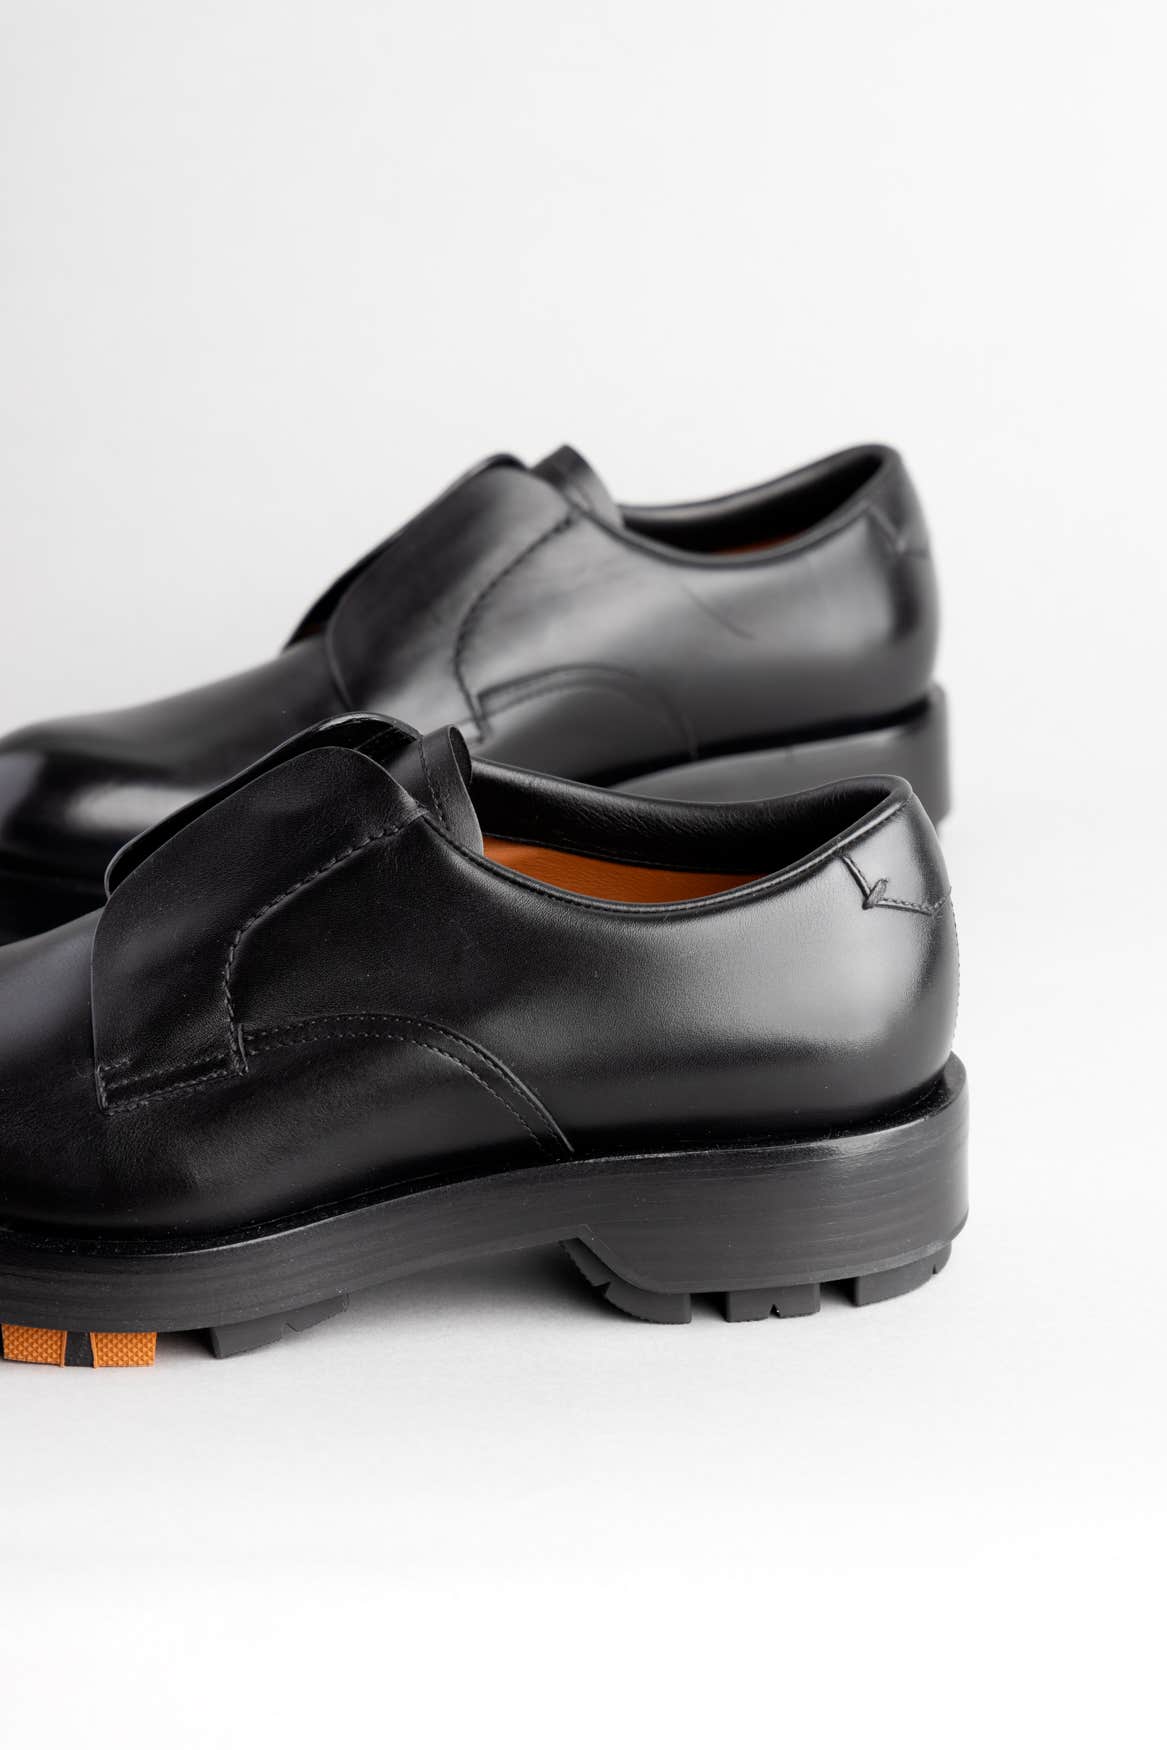 BLACK HAND-BUFFED LEATHER UDINE DERBY SHOES